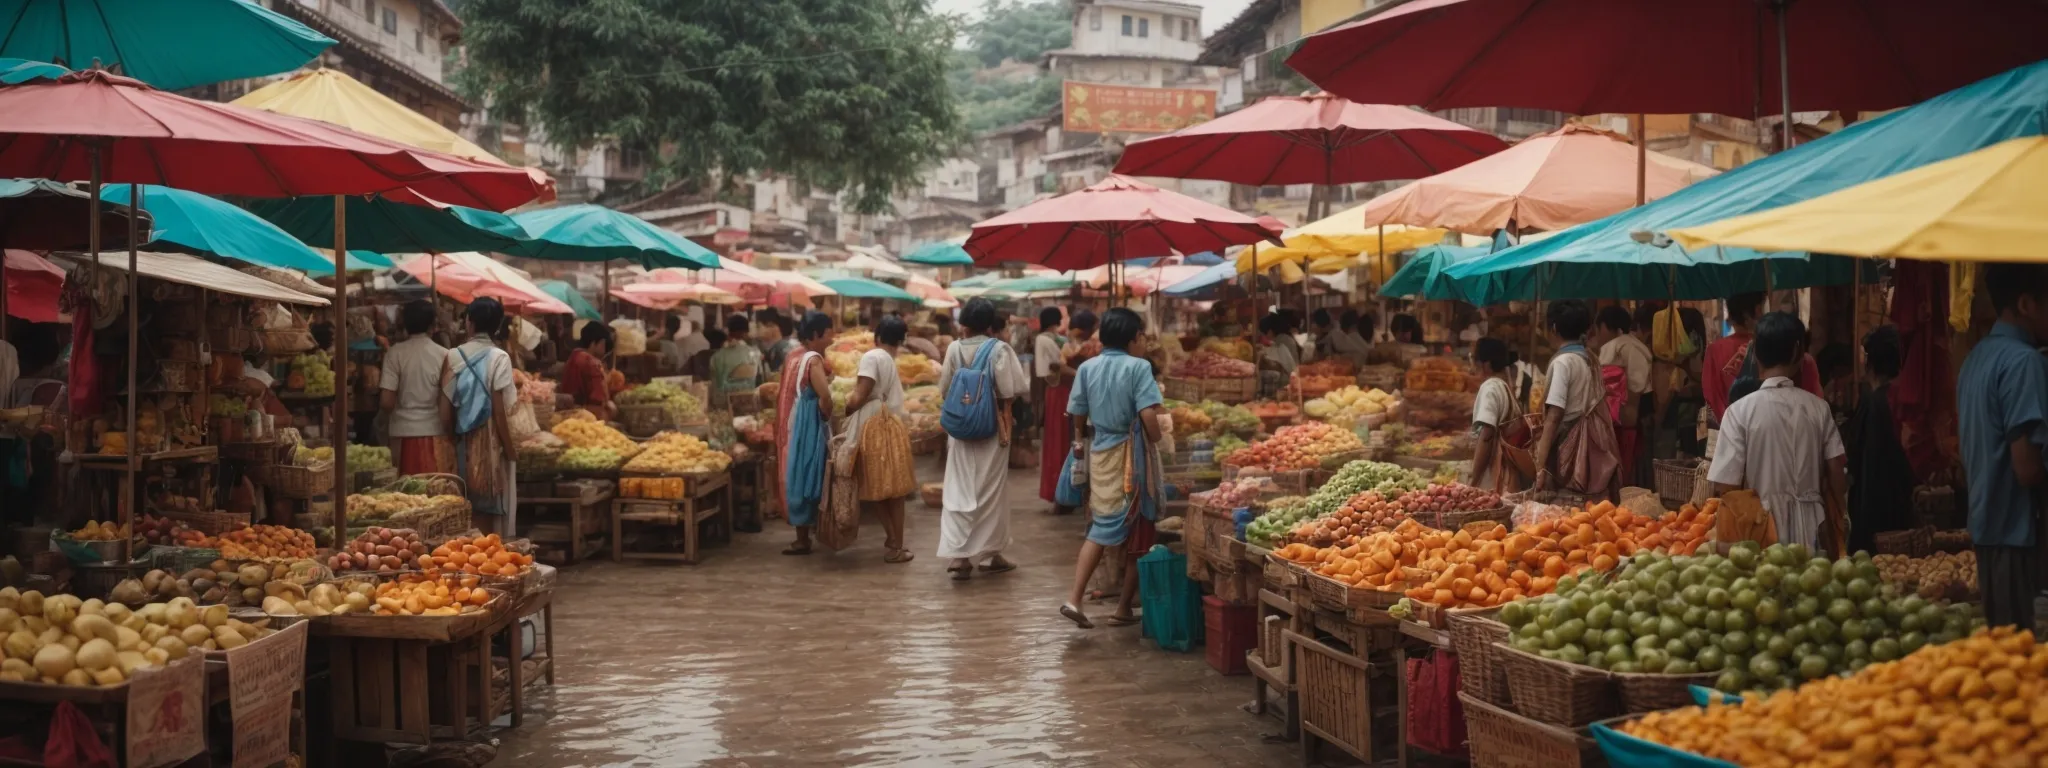 a picturesque market scene bustling with local products and vendors under a canopy of colorful umbrellas.